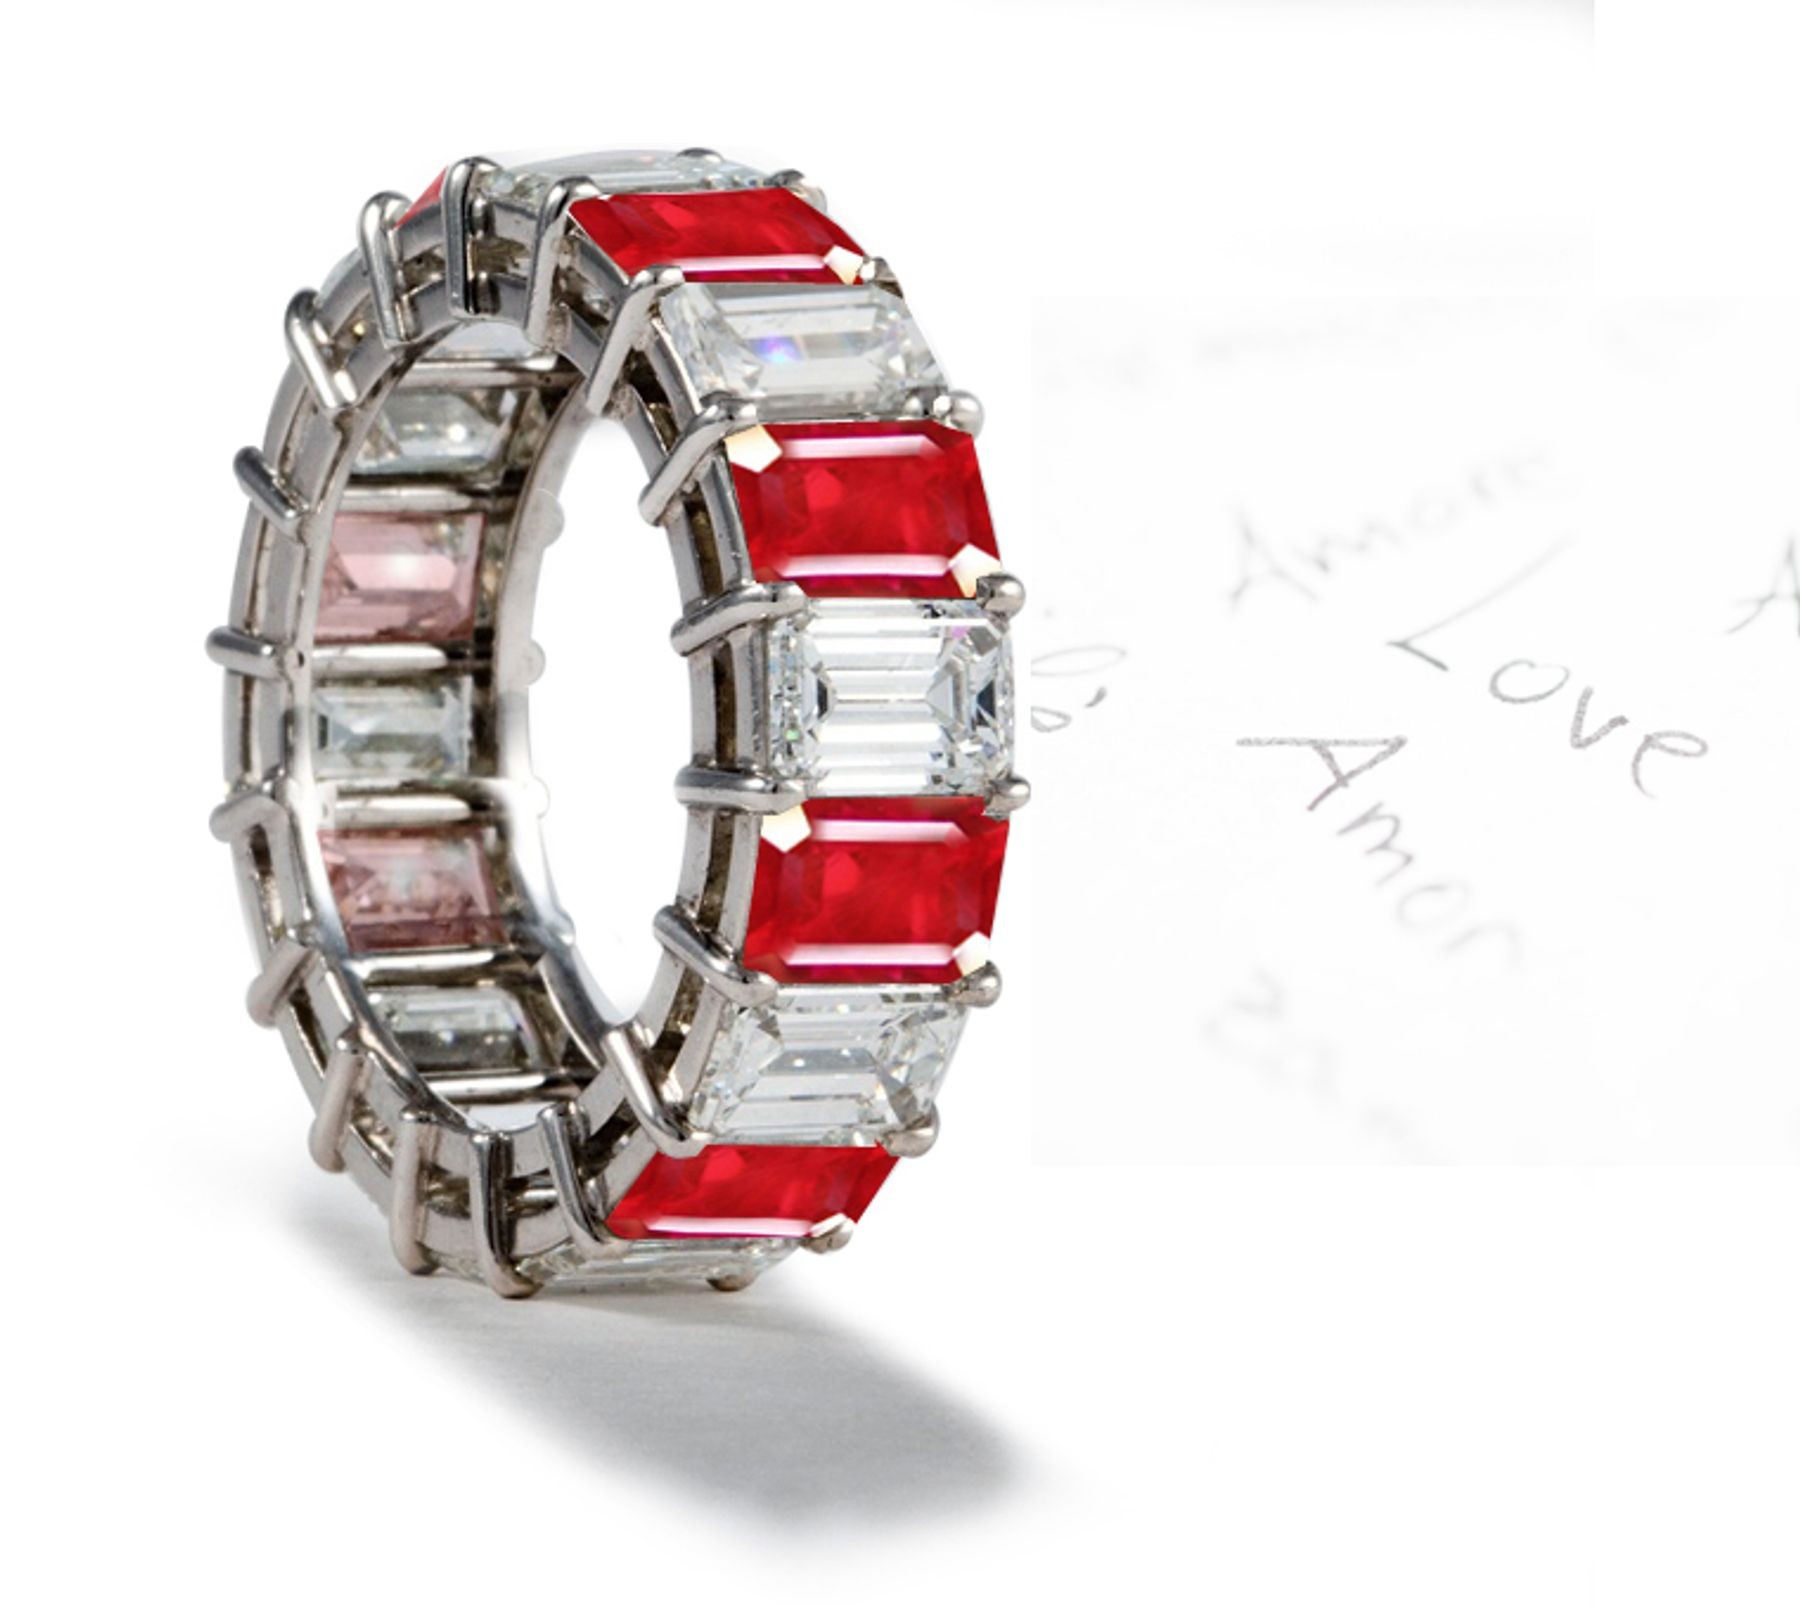 Impeccable Beauty: Gold Emerald Cut Ruby Diamond Eternity Ring